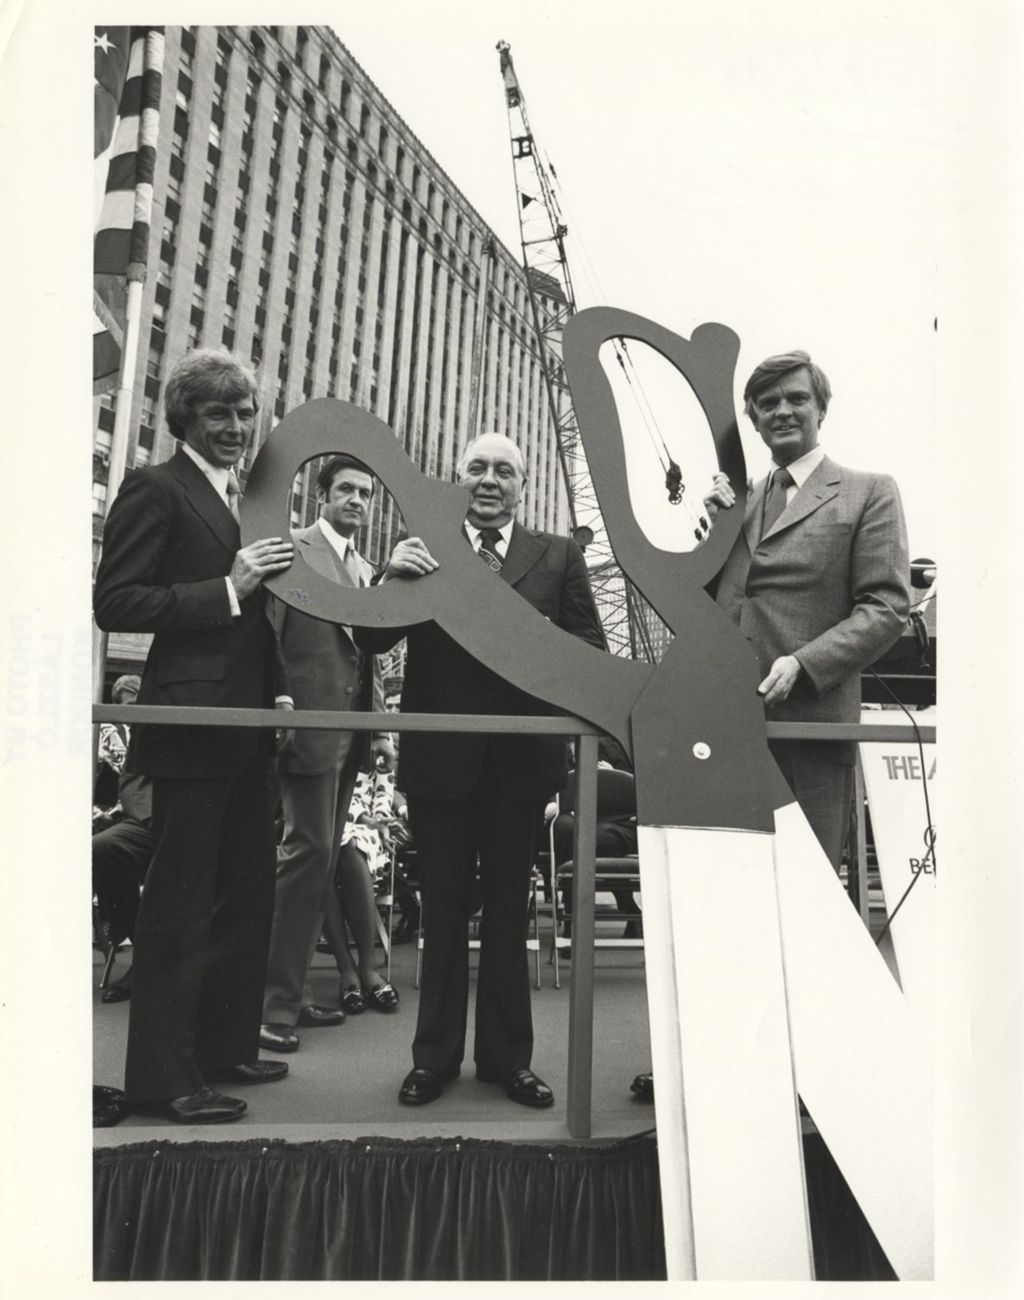 Miniature of Richard J. Daley and Dan Walker at ground cutting for the Apparel Center